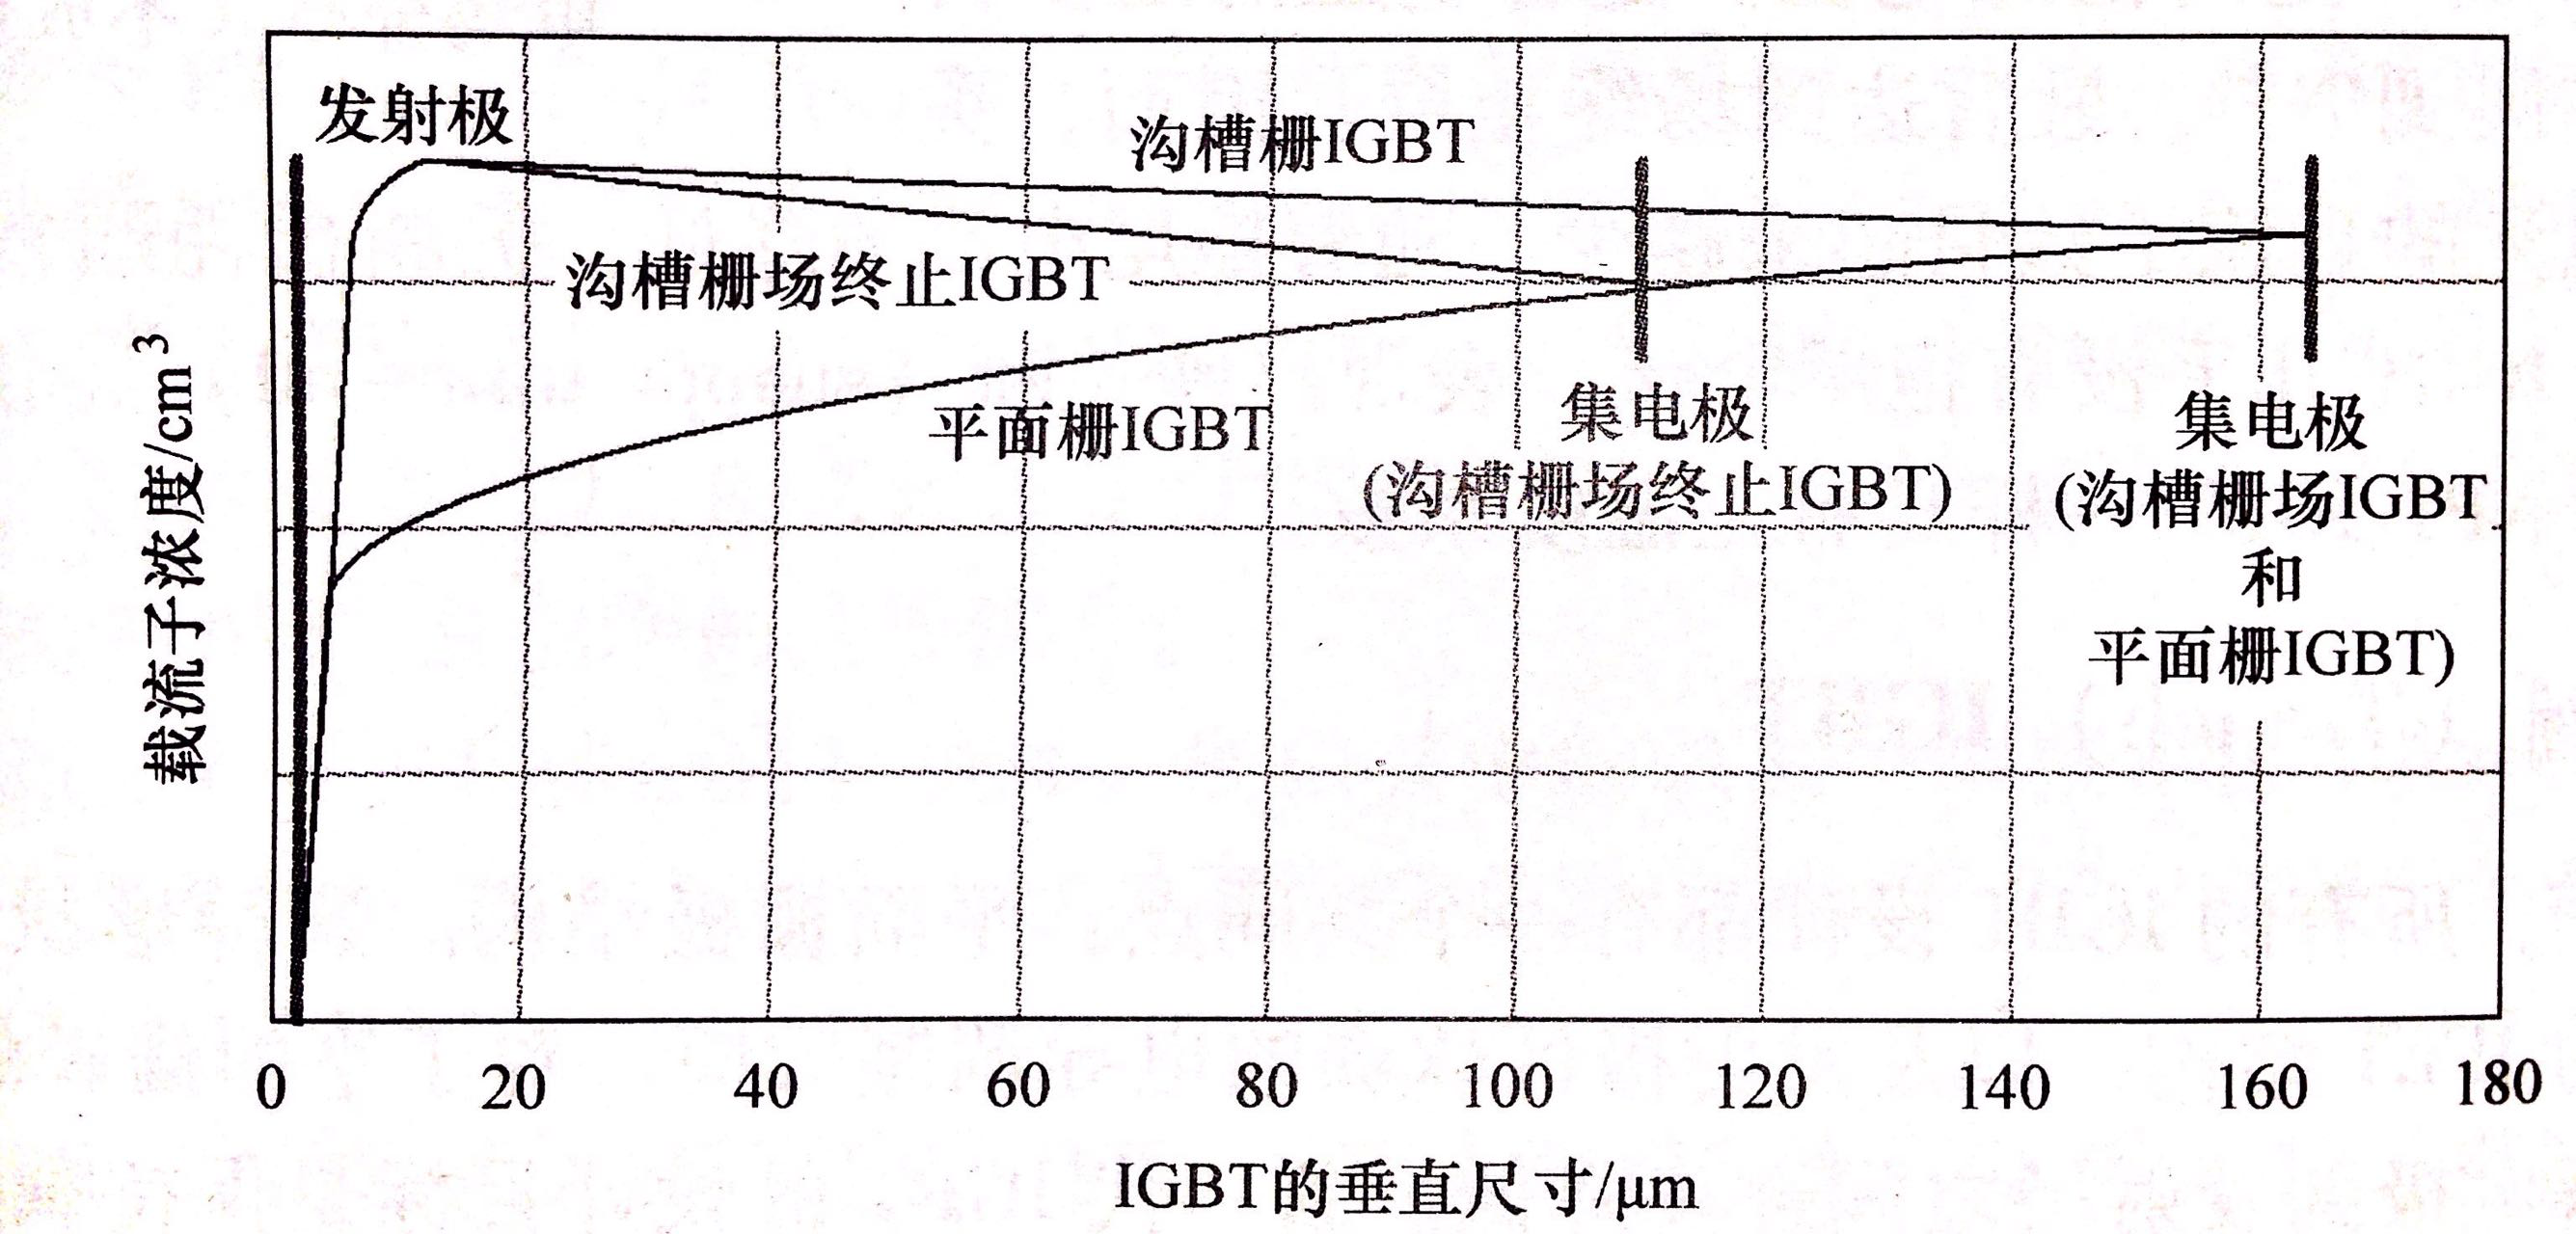 Figure 2 Comparison of internal carrier concentration of trench gate and planar gate structure IGBT